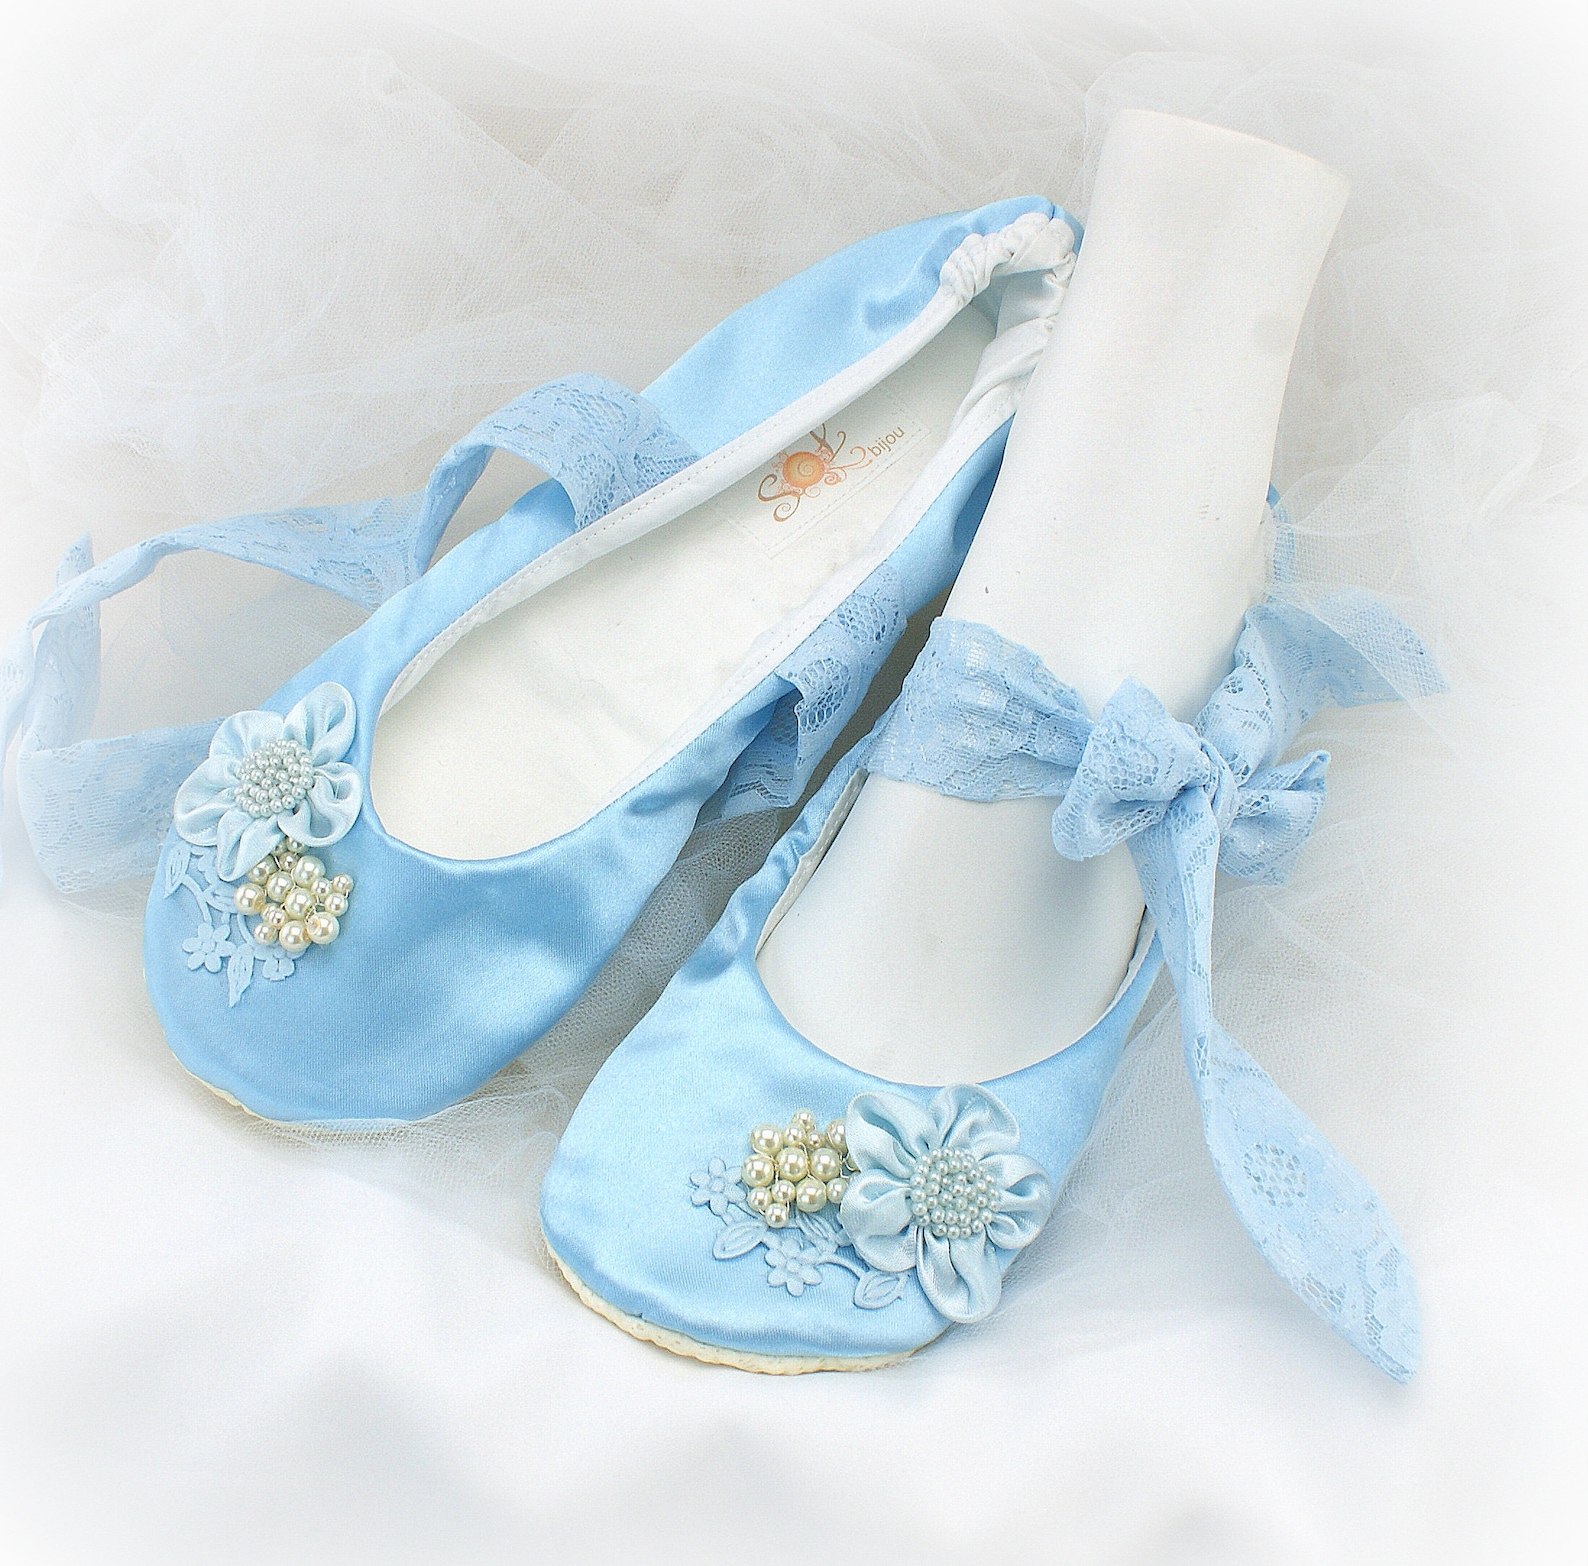 Wedding Ballet Shoes in Blue Satin with Lace Side Ties and | Etsy